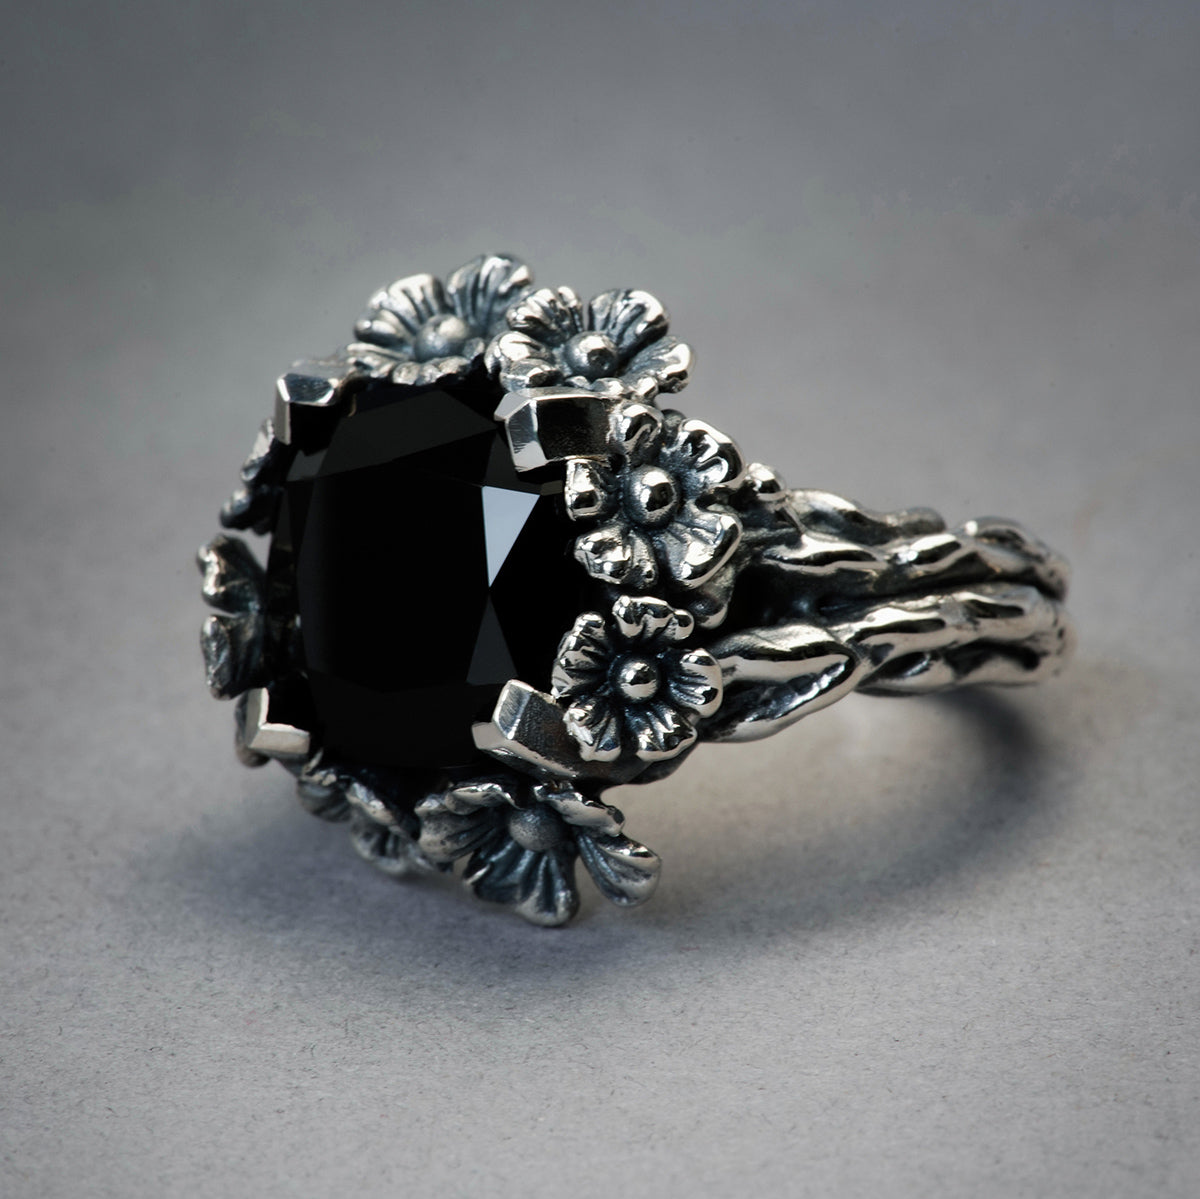 Onyx Forget Me Not Ring